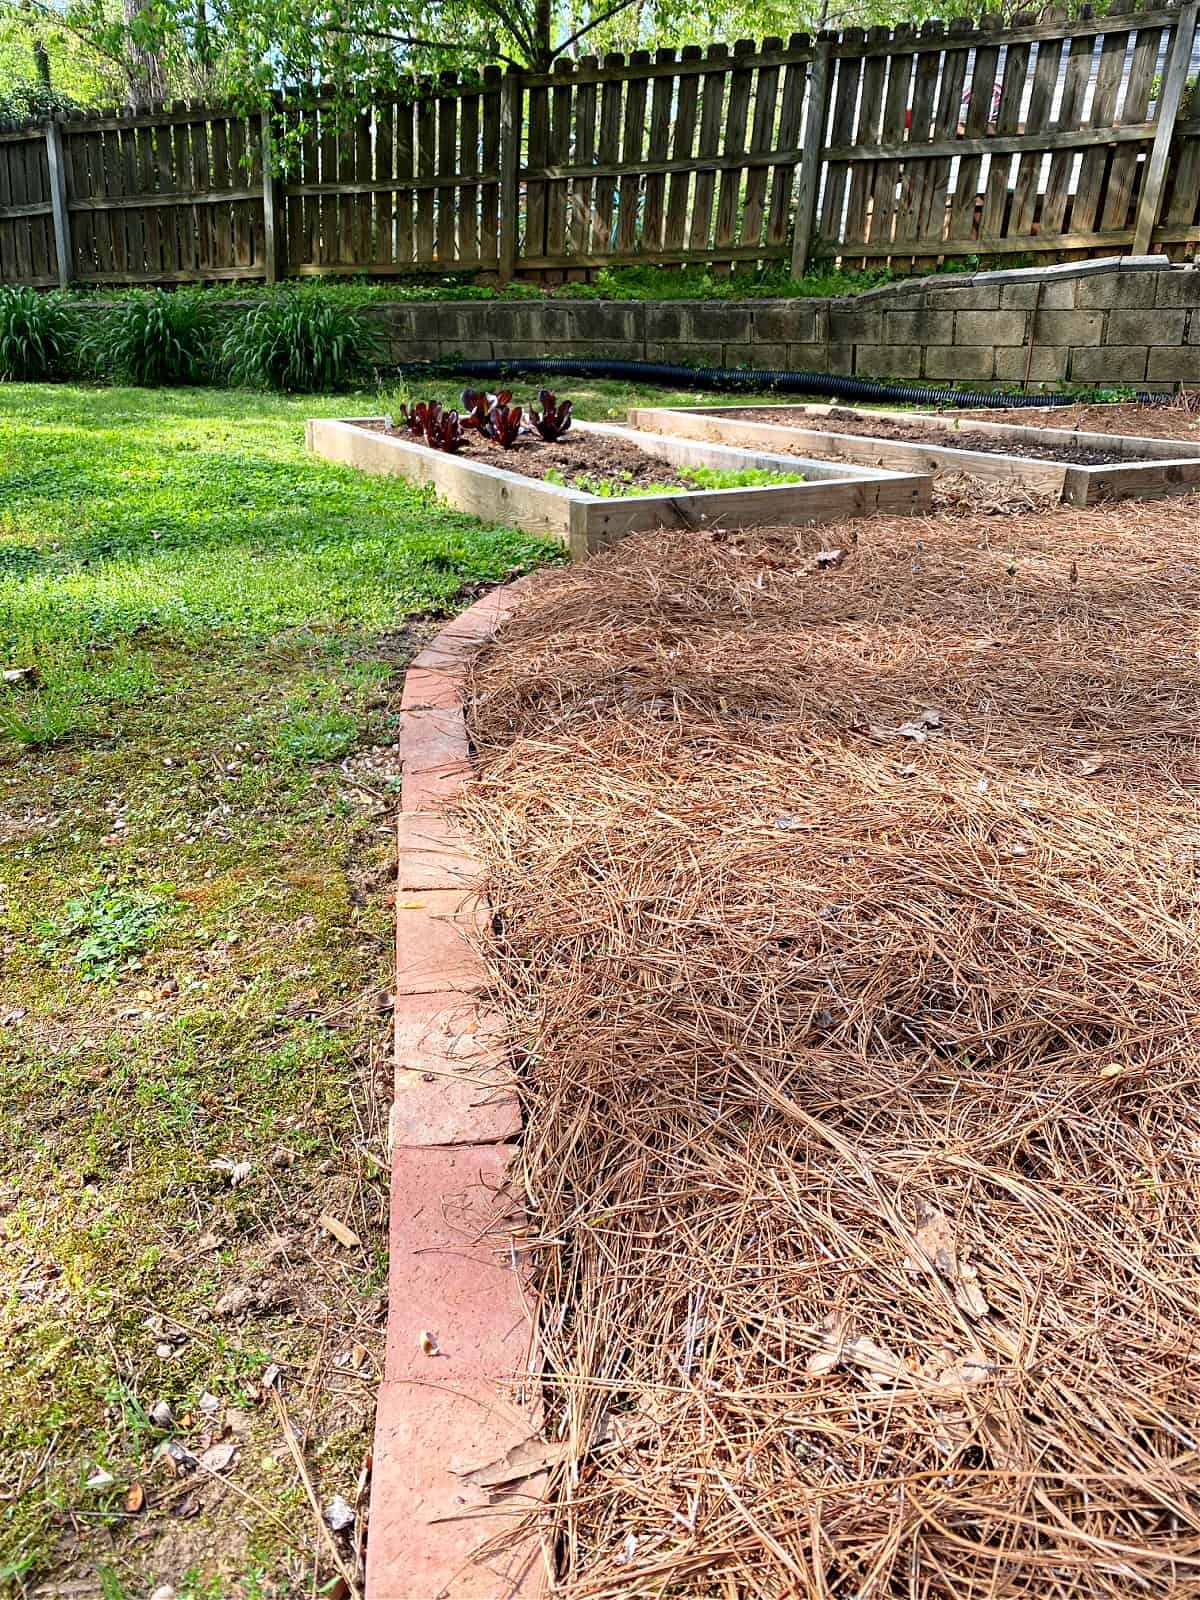 How To Lay Brick Edging In Your Garden, How To Edge A Garden With Brick